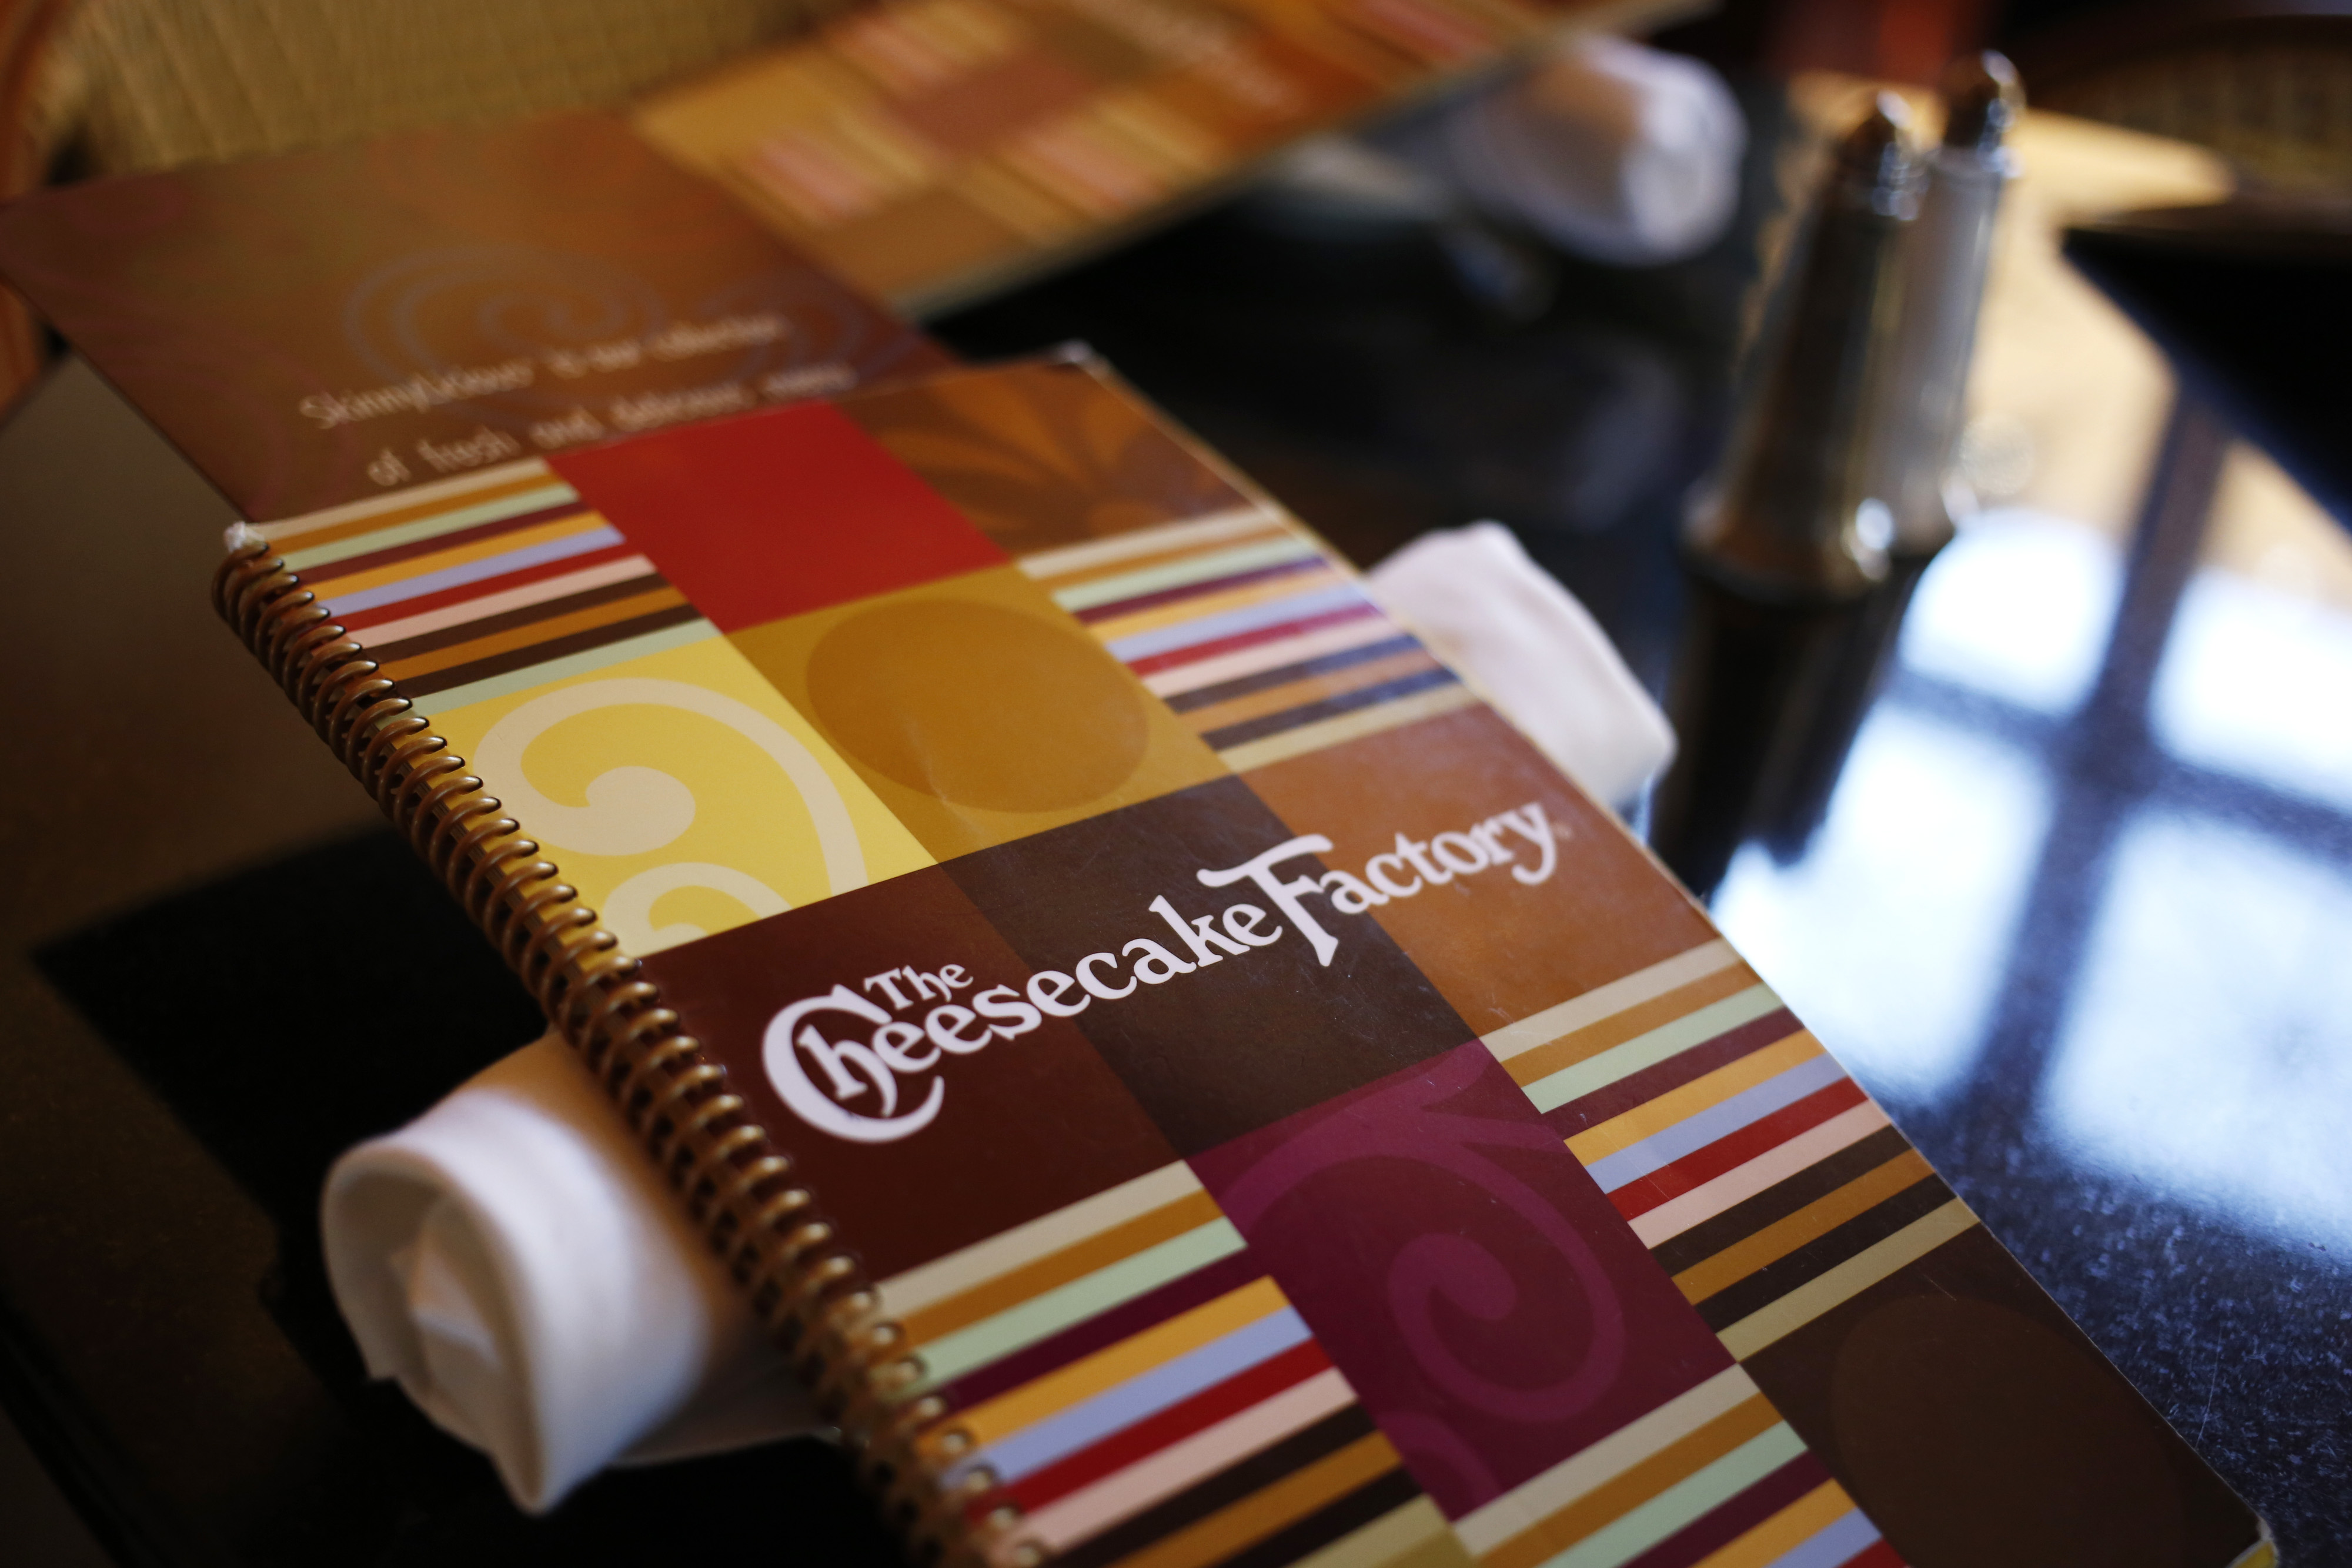 A menu sits on a table at a Cheesecake Factory restaurant in Louisville, Kentucky on Nov. 13, 2013. (Bloomberg—Bloomberg via Getty Images)